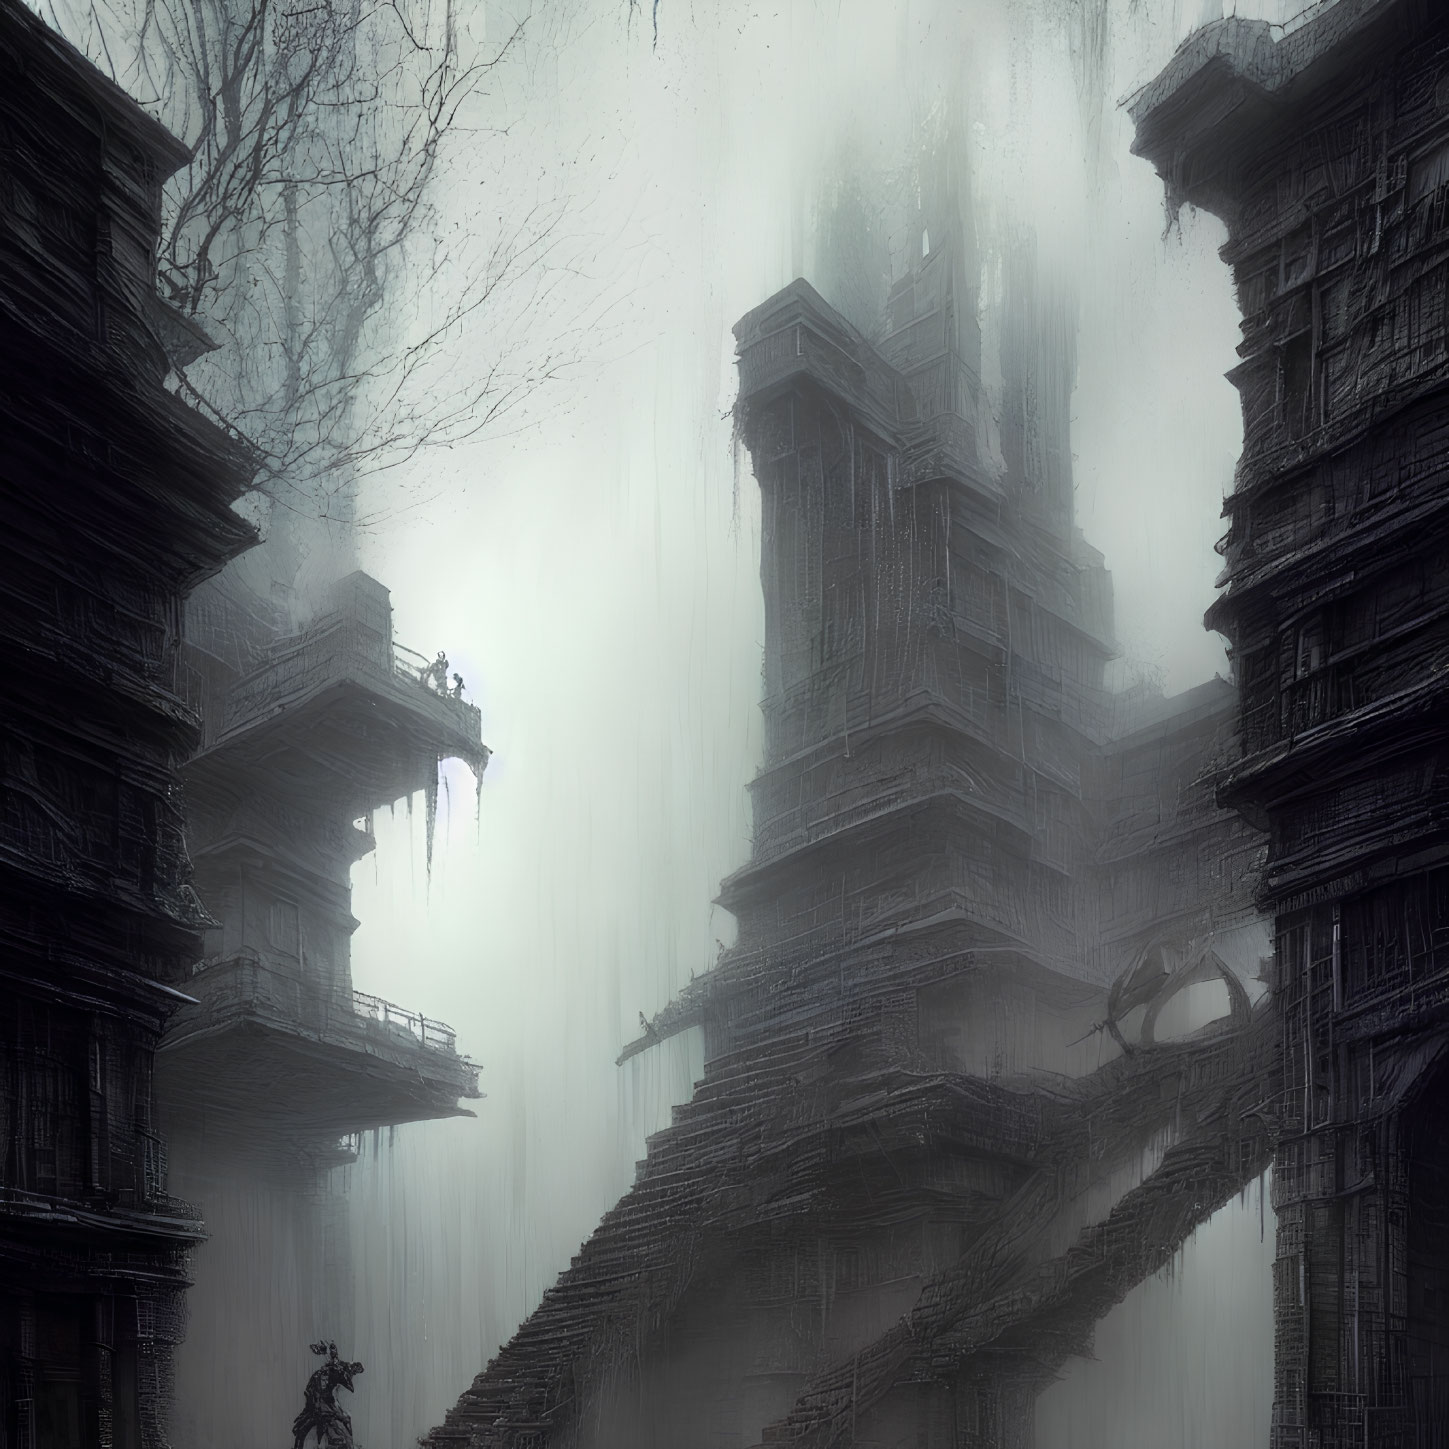 Abandoned multi-tiered structures in fog with lone figure on horseback